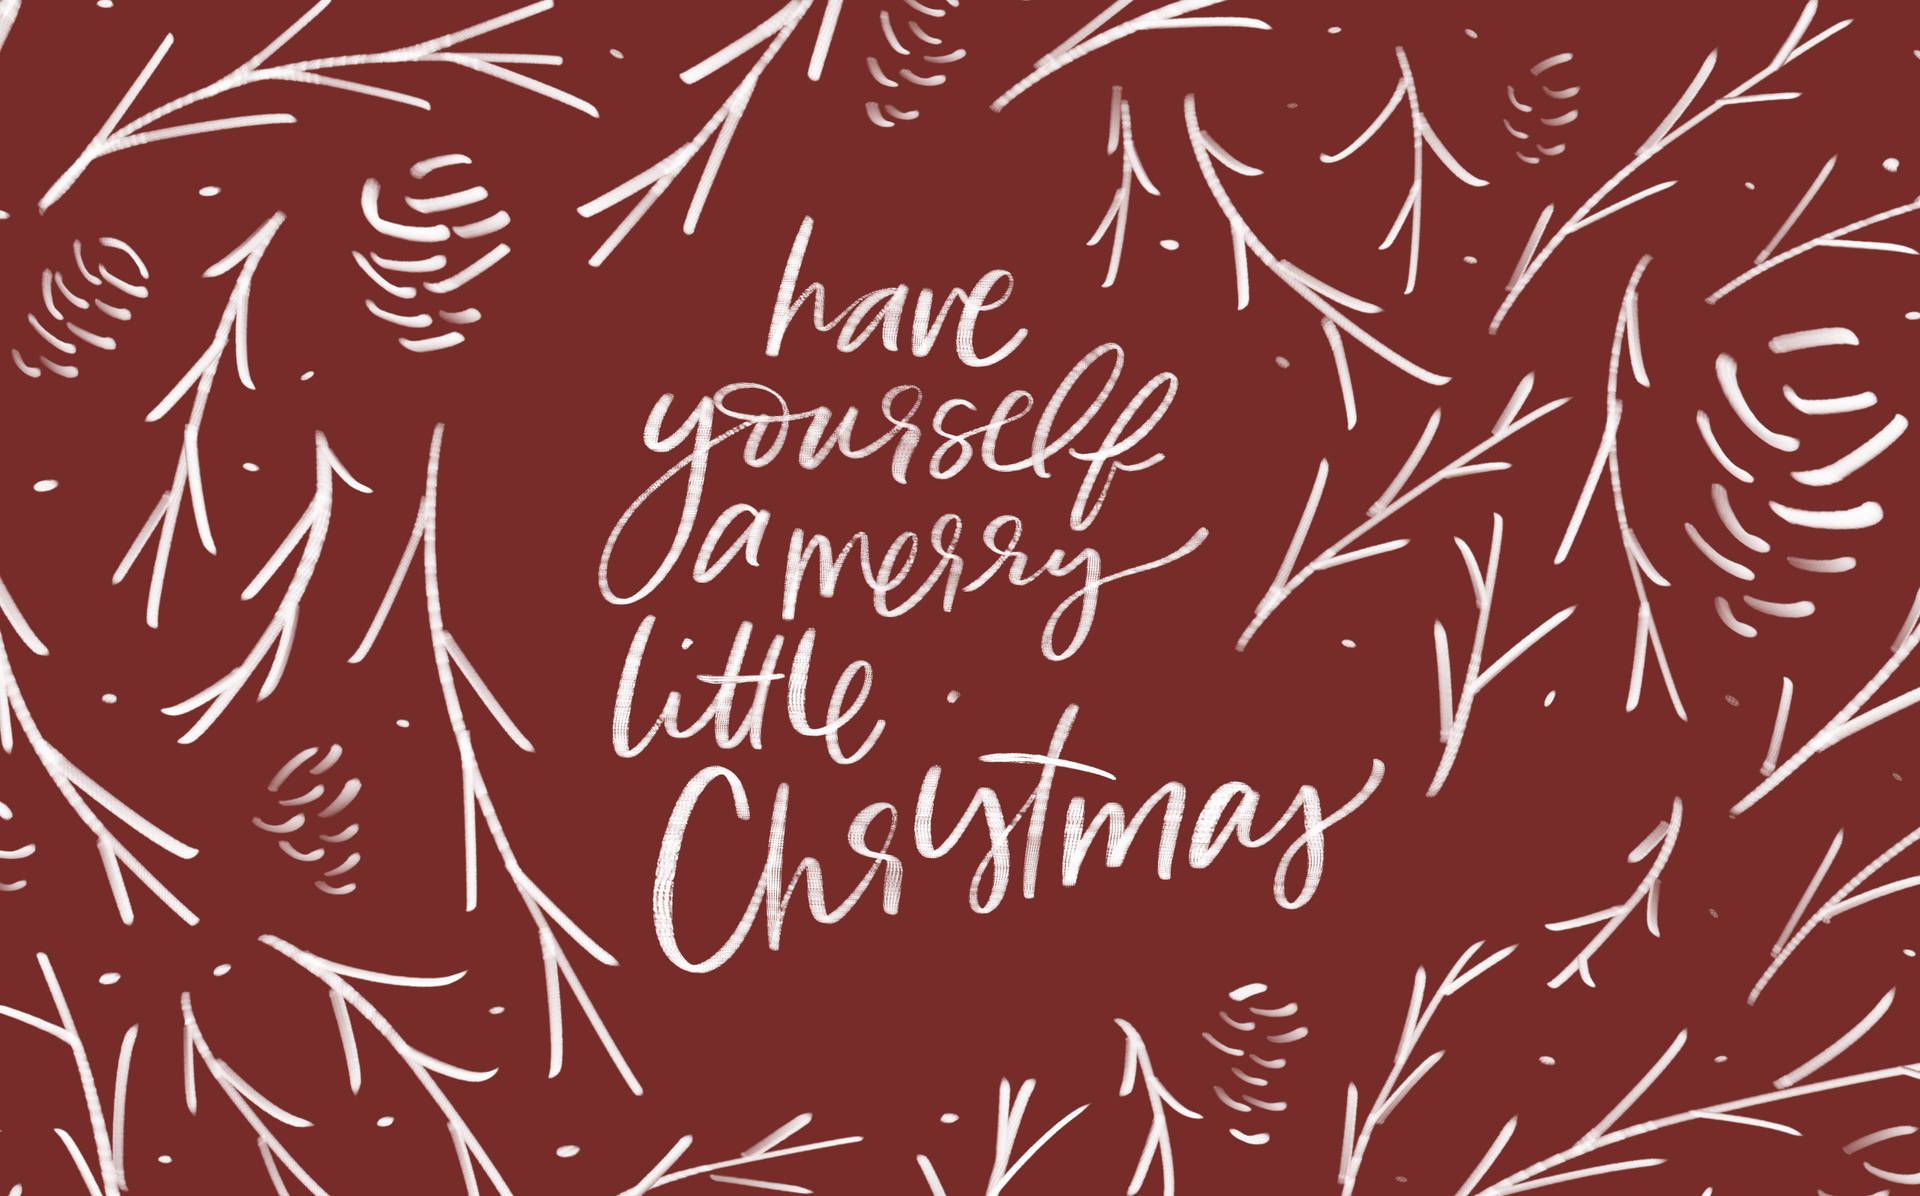 A christmas card with the words have yourself merry little - Christmas